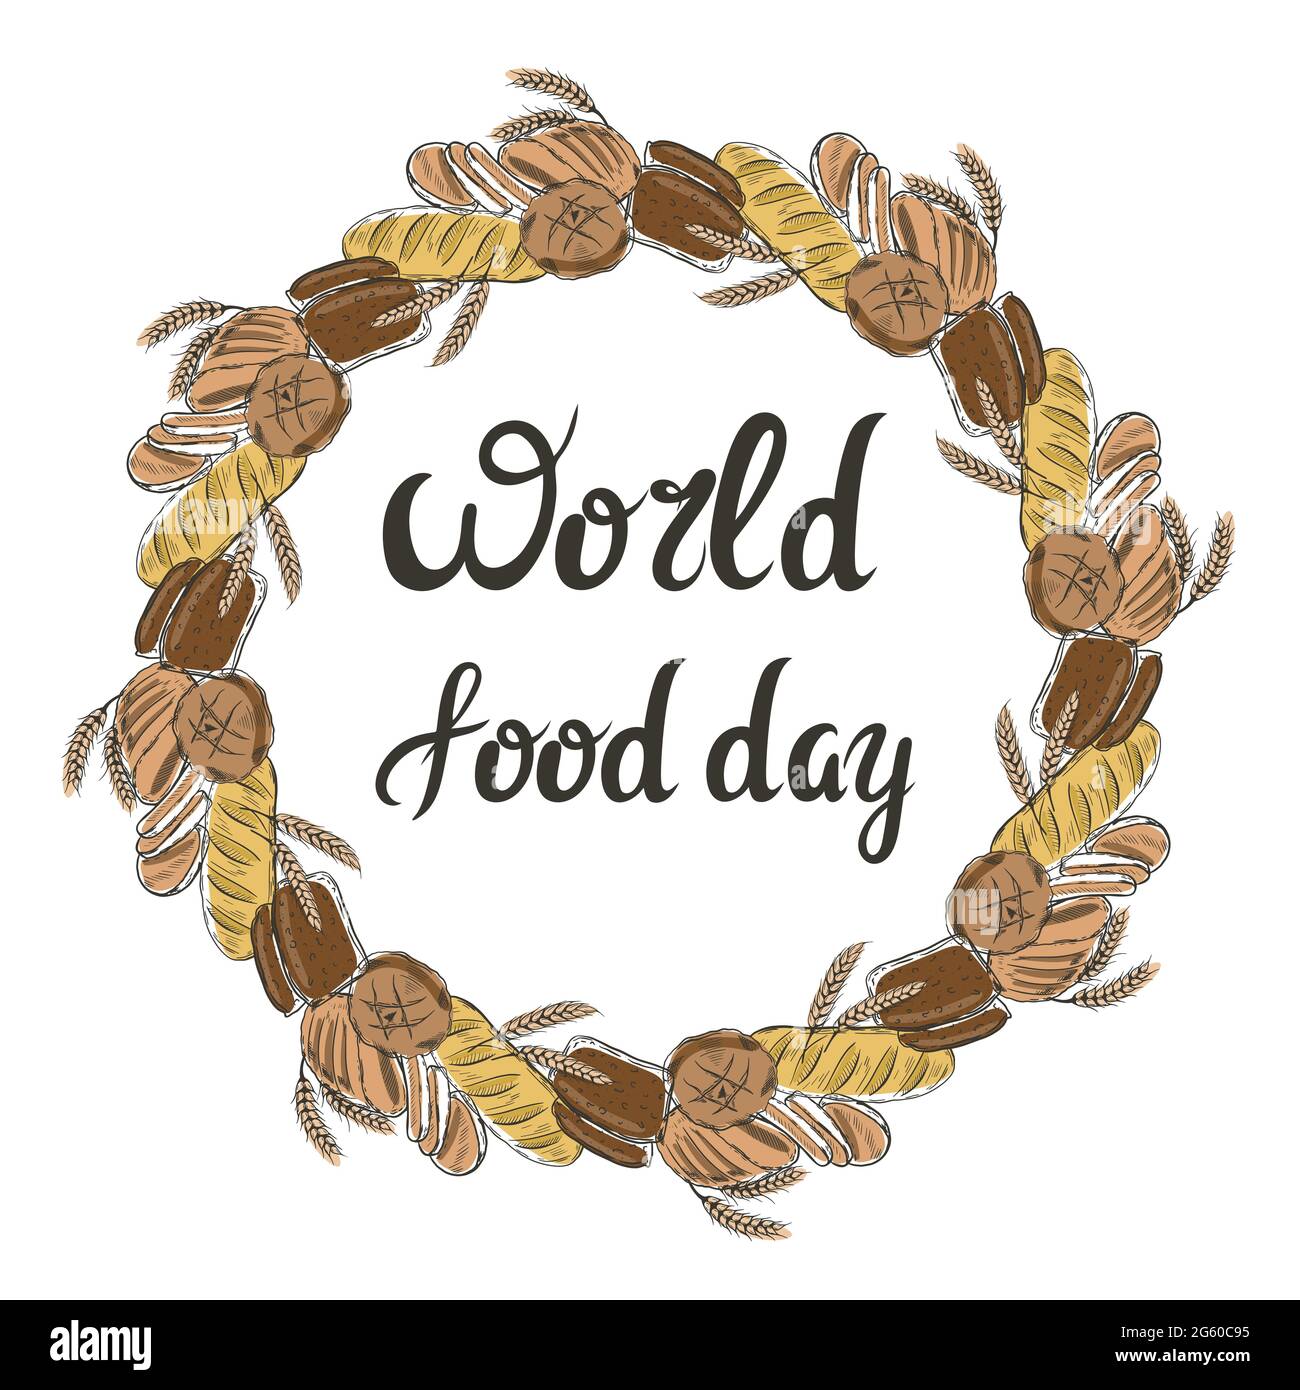 World food day, hand lettering and frame, vector illustration. Stock Vector